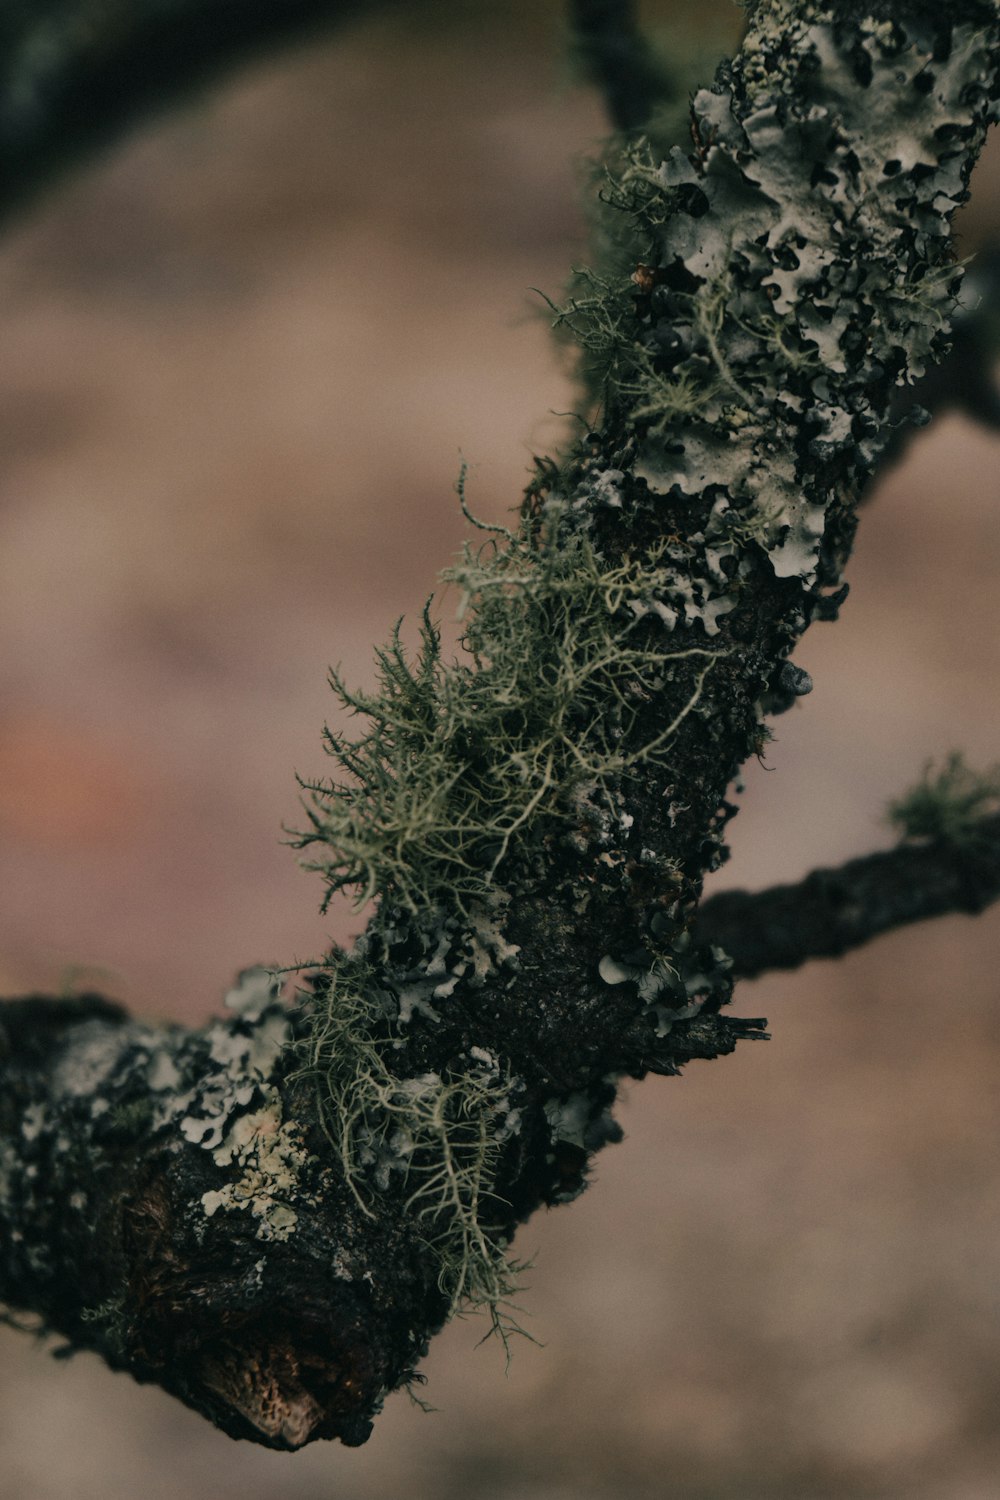 a close up of a tree branch with moss growing on it